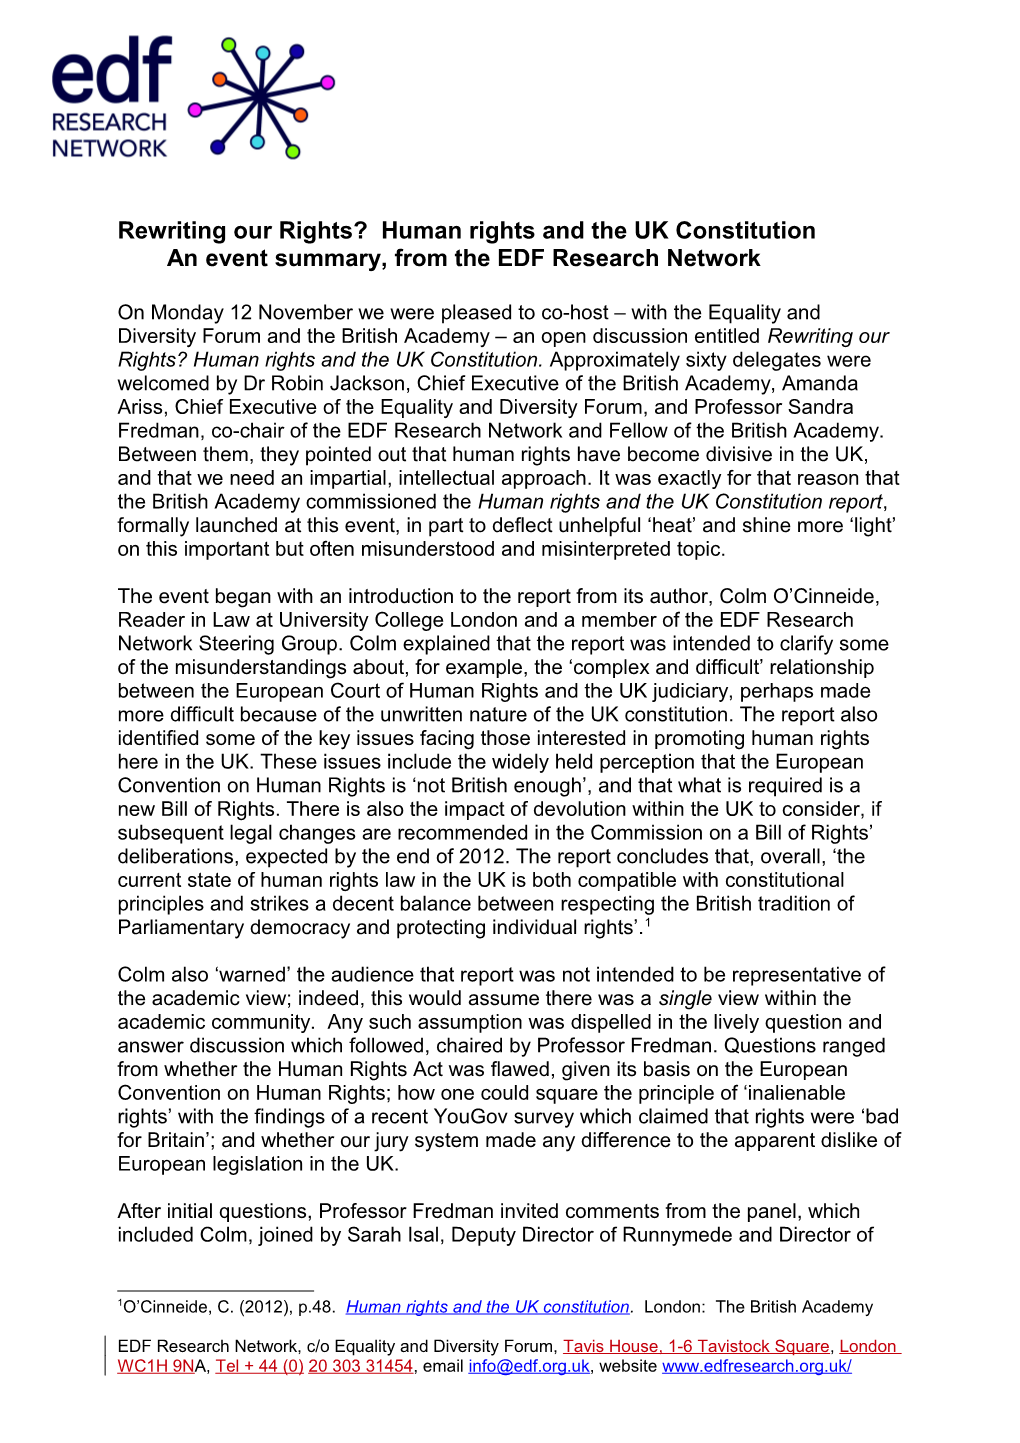 Rewriting Our Rights? Human Rights and the UK Constitutionan Event Summary, from the EDF